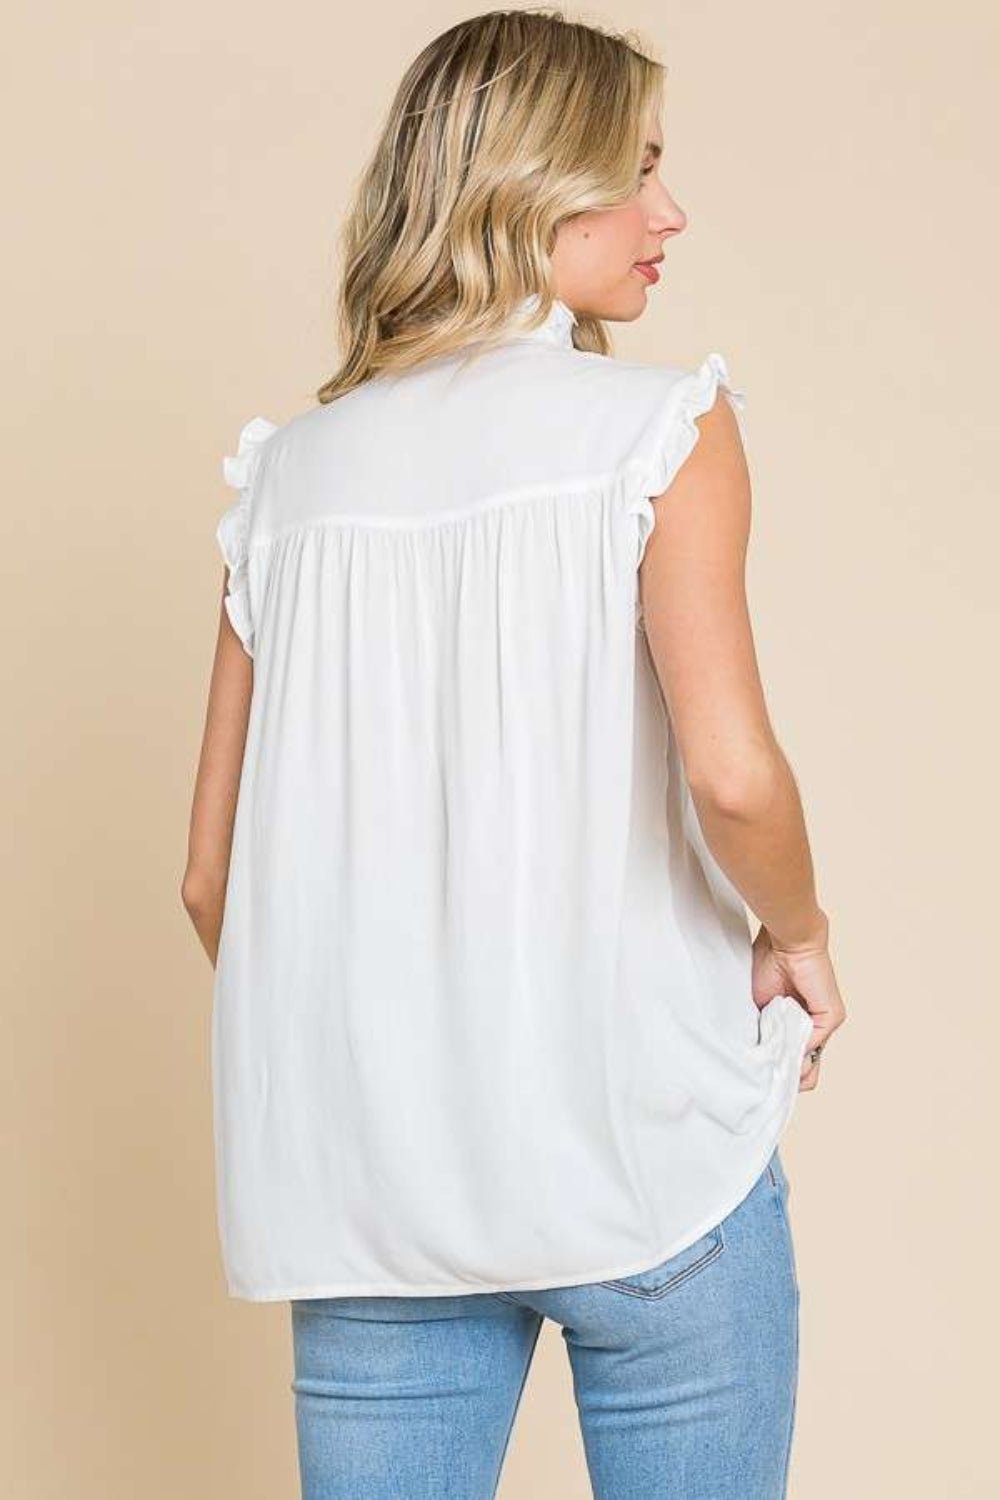 Frill Edge Smocked Sleeveless Top in Soft WhiteTopCulture Code